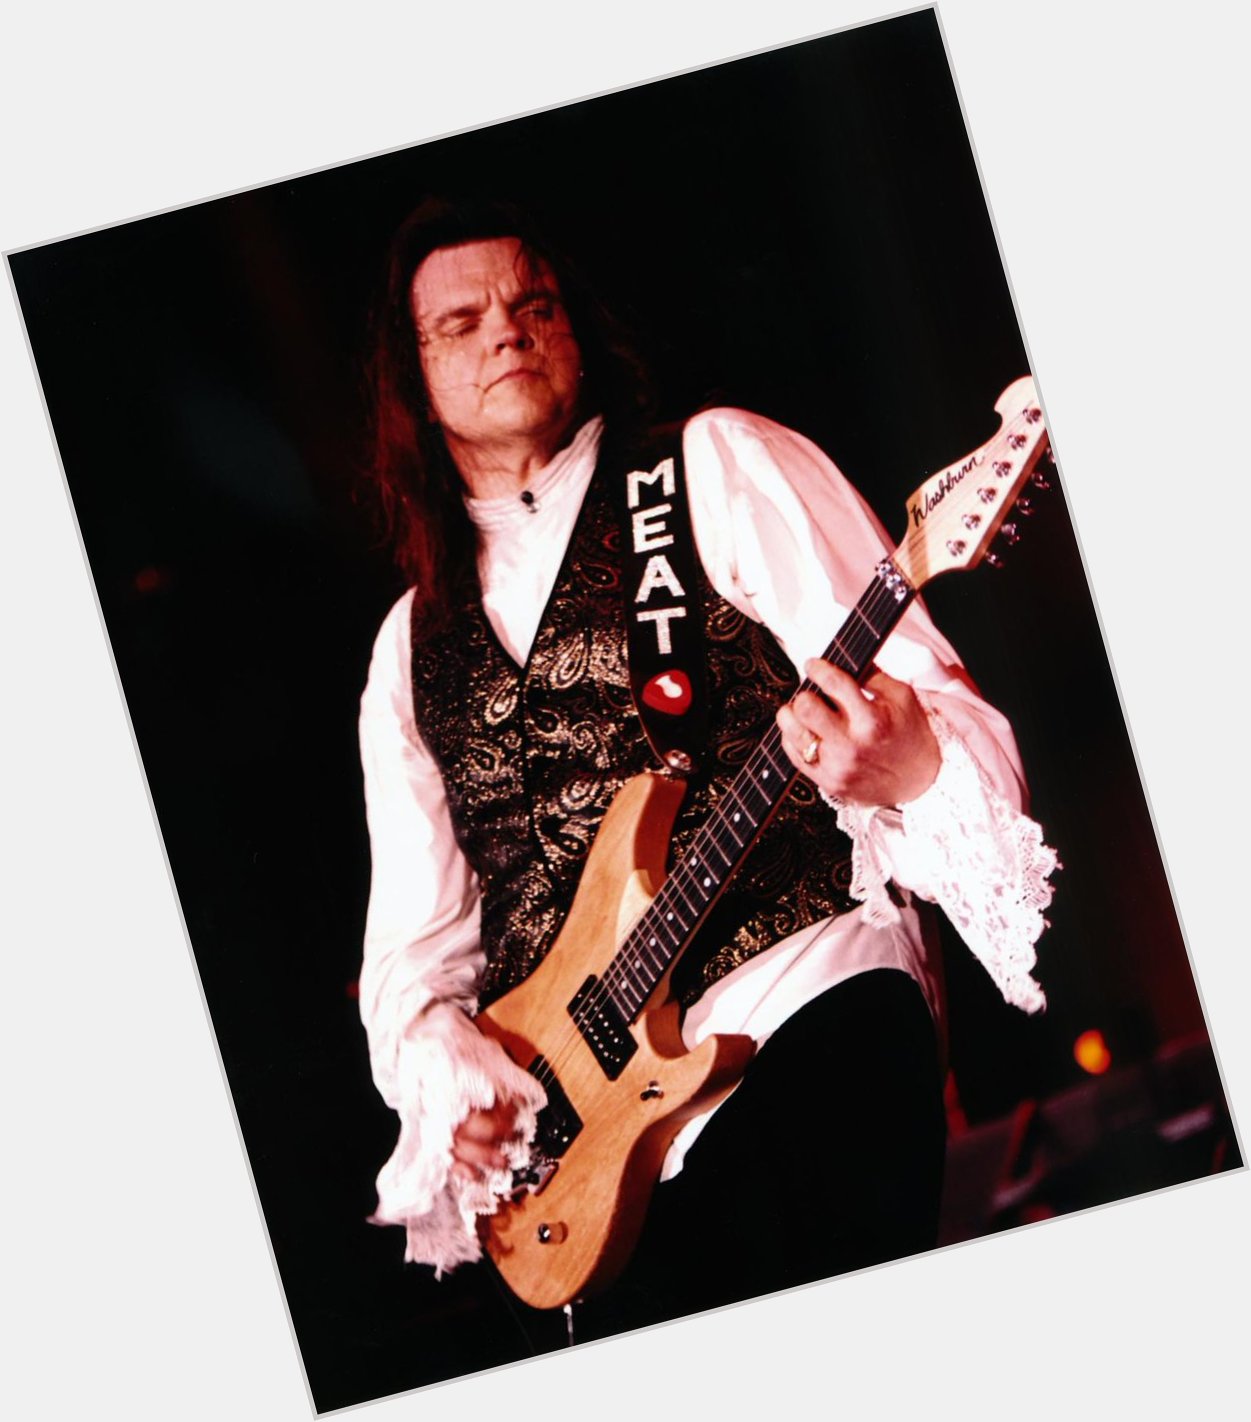 Happy Birthday to Meat Loaf, who turns 68 today! 